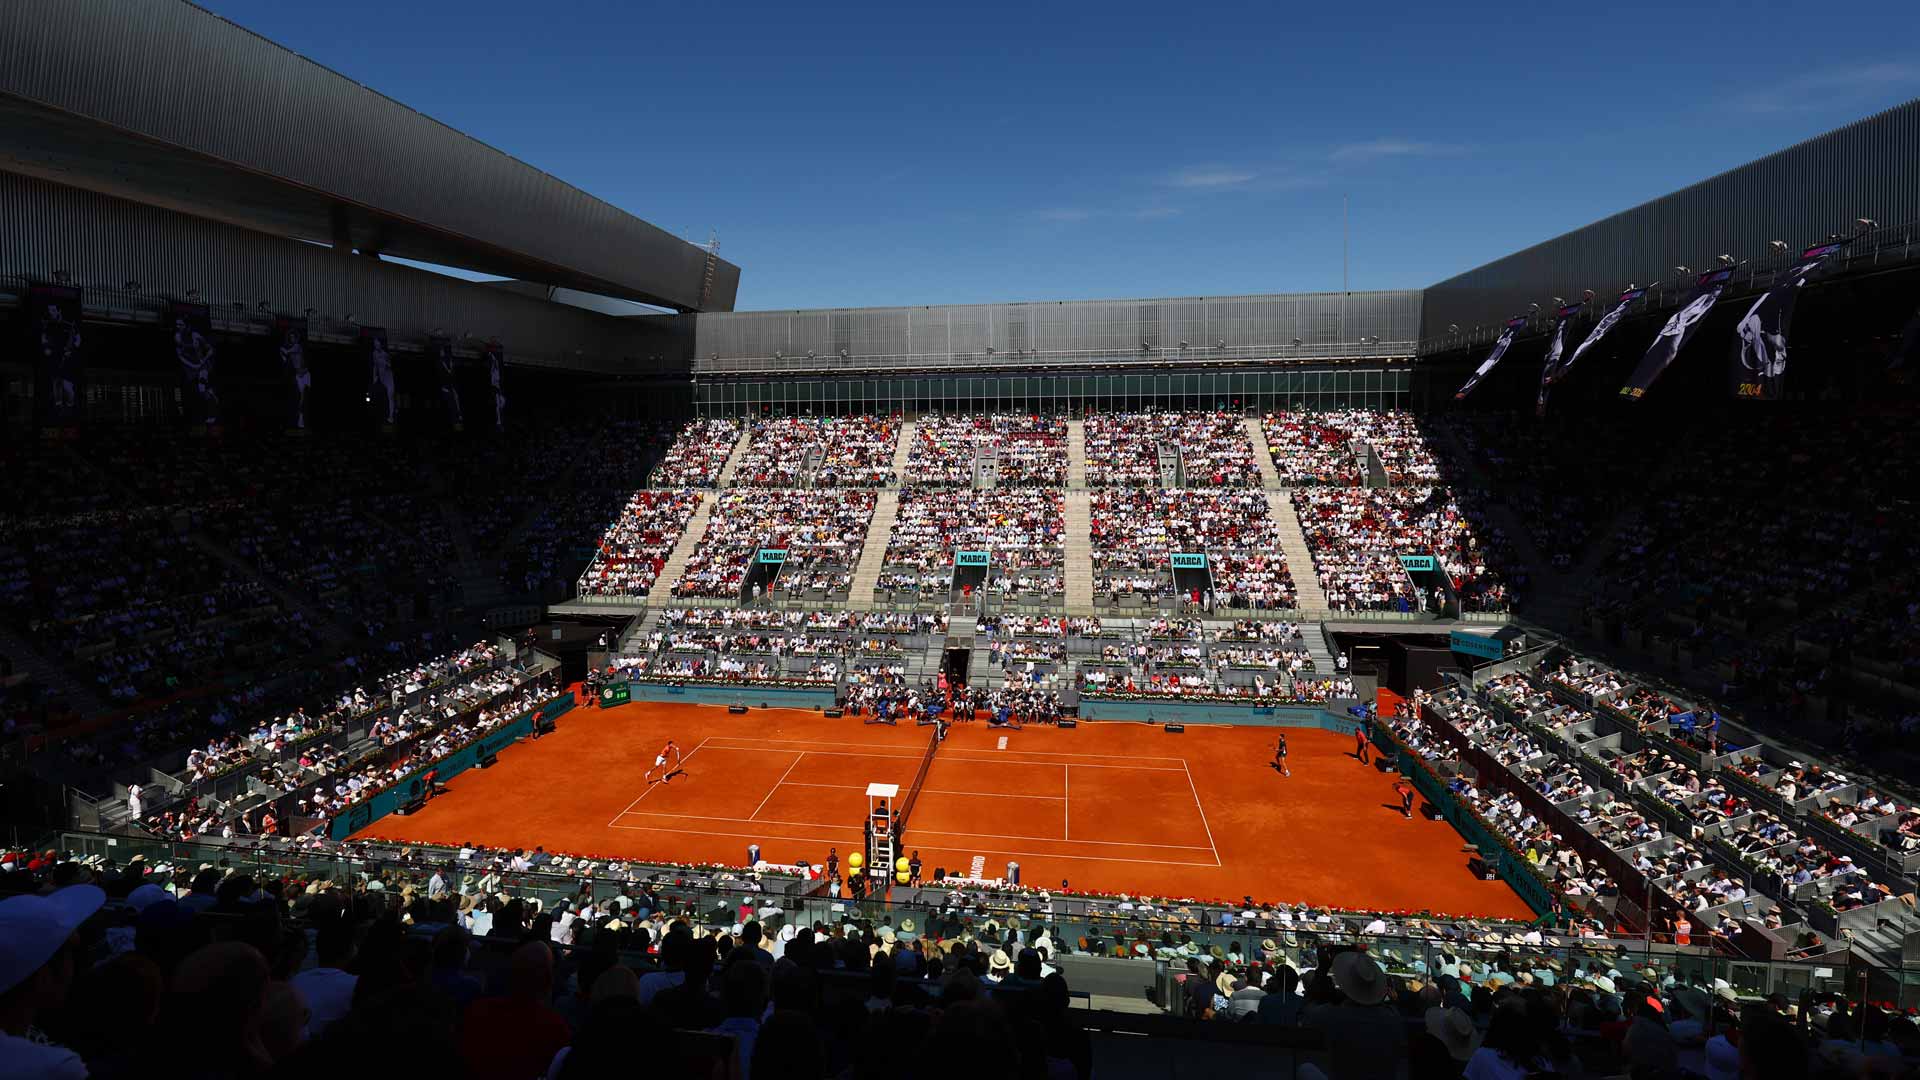 The 2023 Mutua Madrid Open will be held Wednesday 26 April - Sunday 7 May.